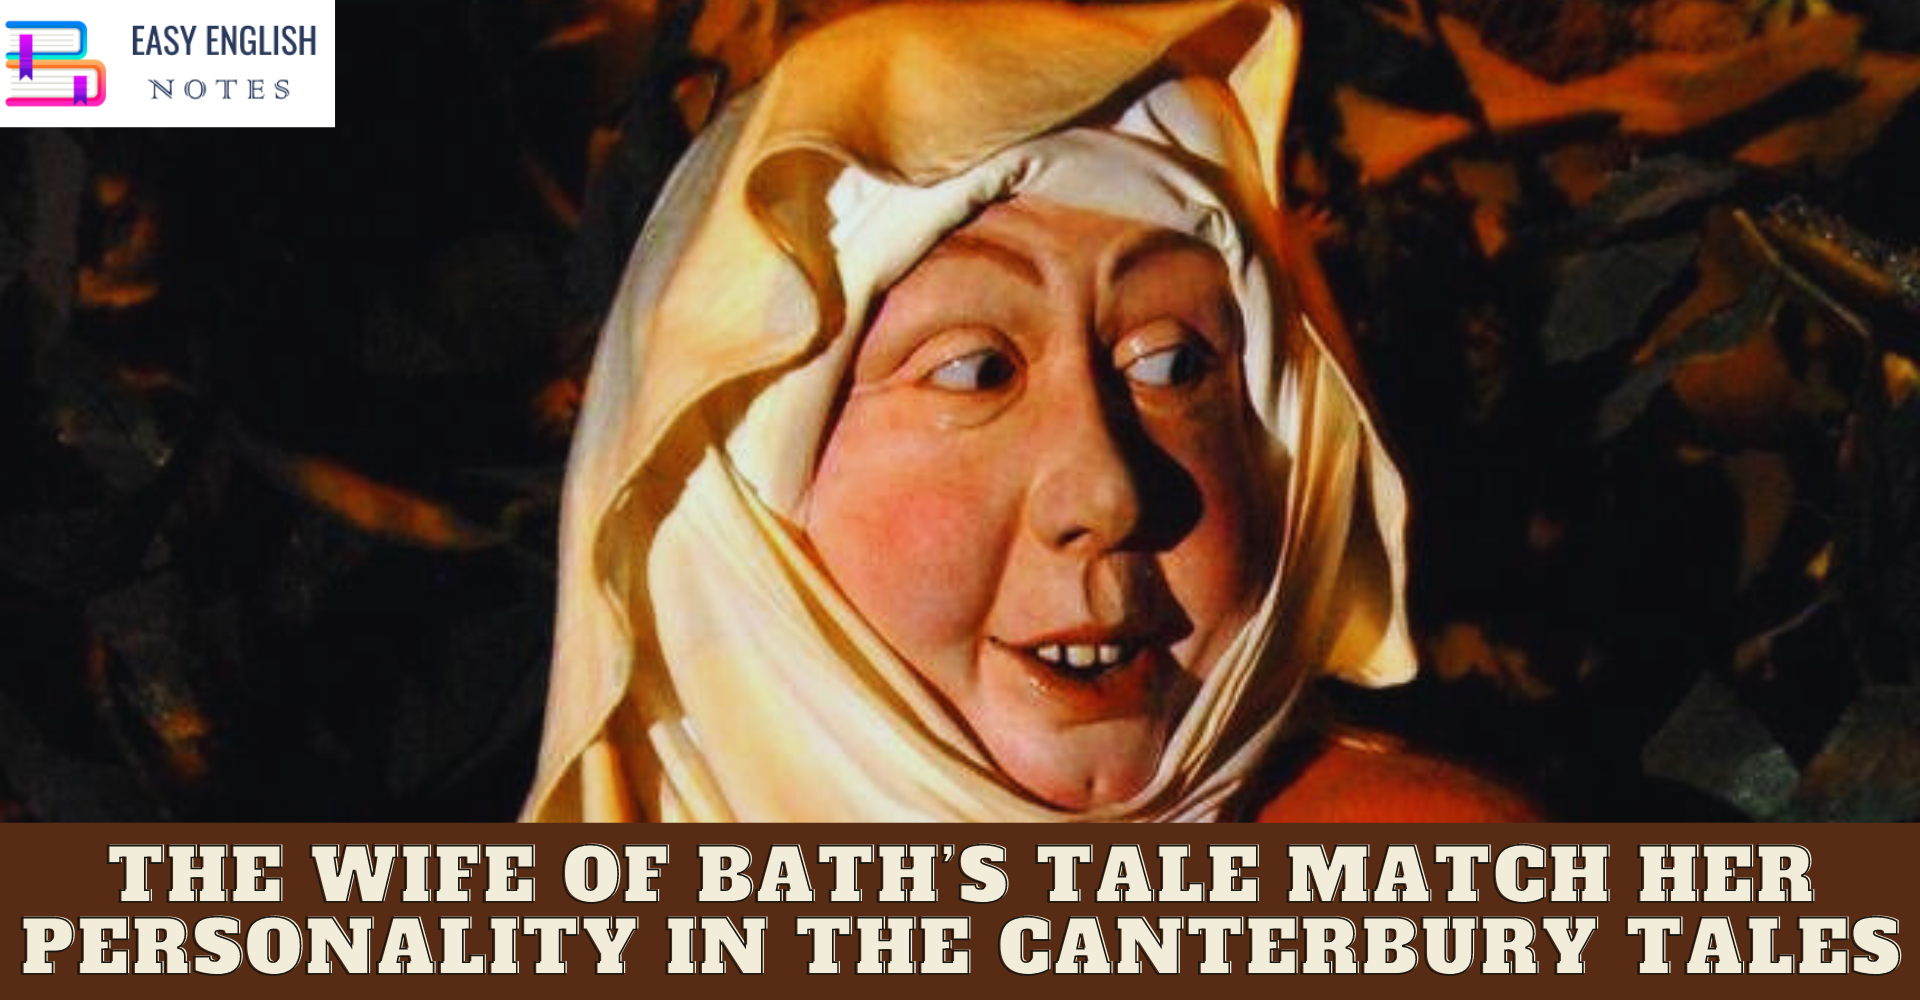 The Wife of Bath’s Tale Match Her Personality in The Canterbury Tales